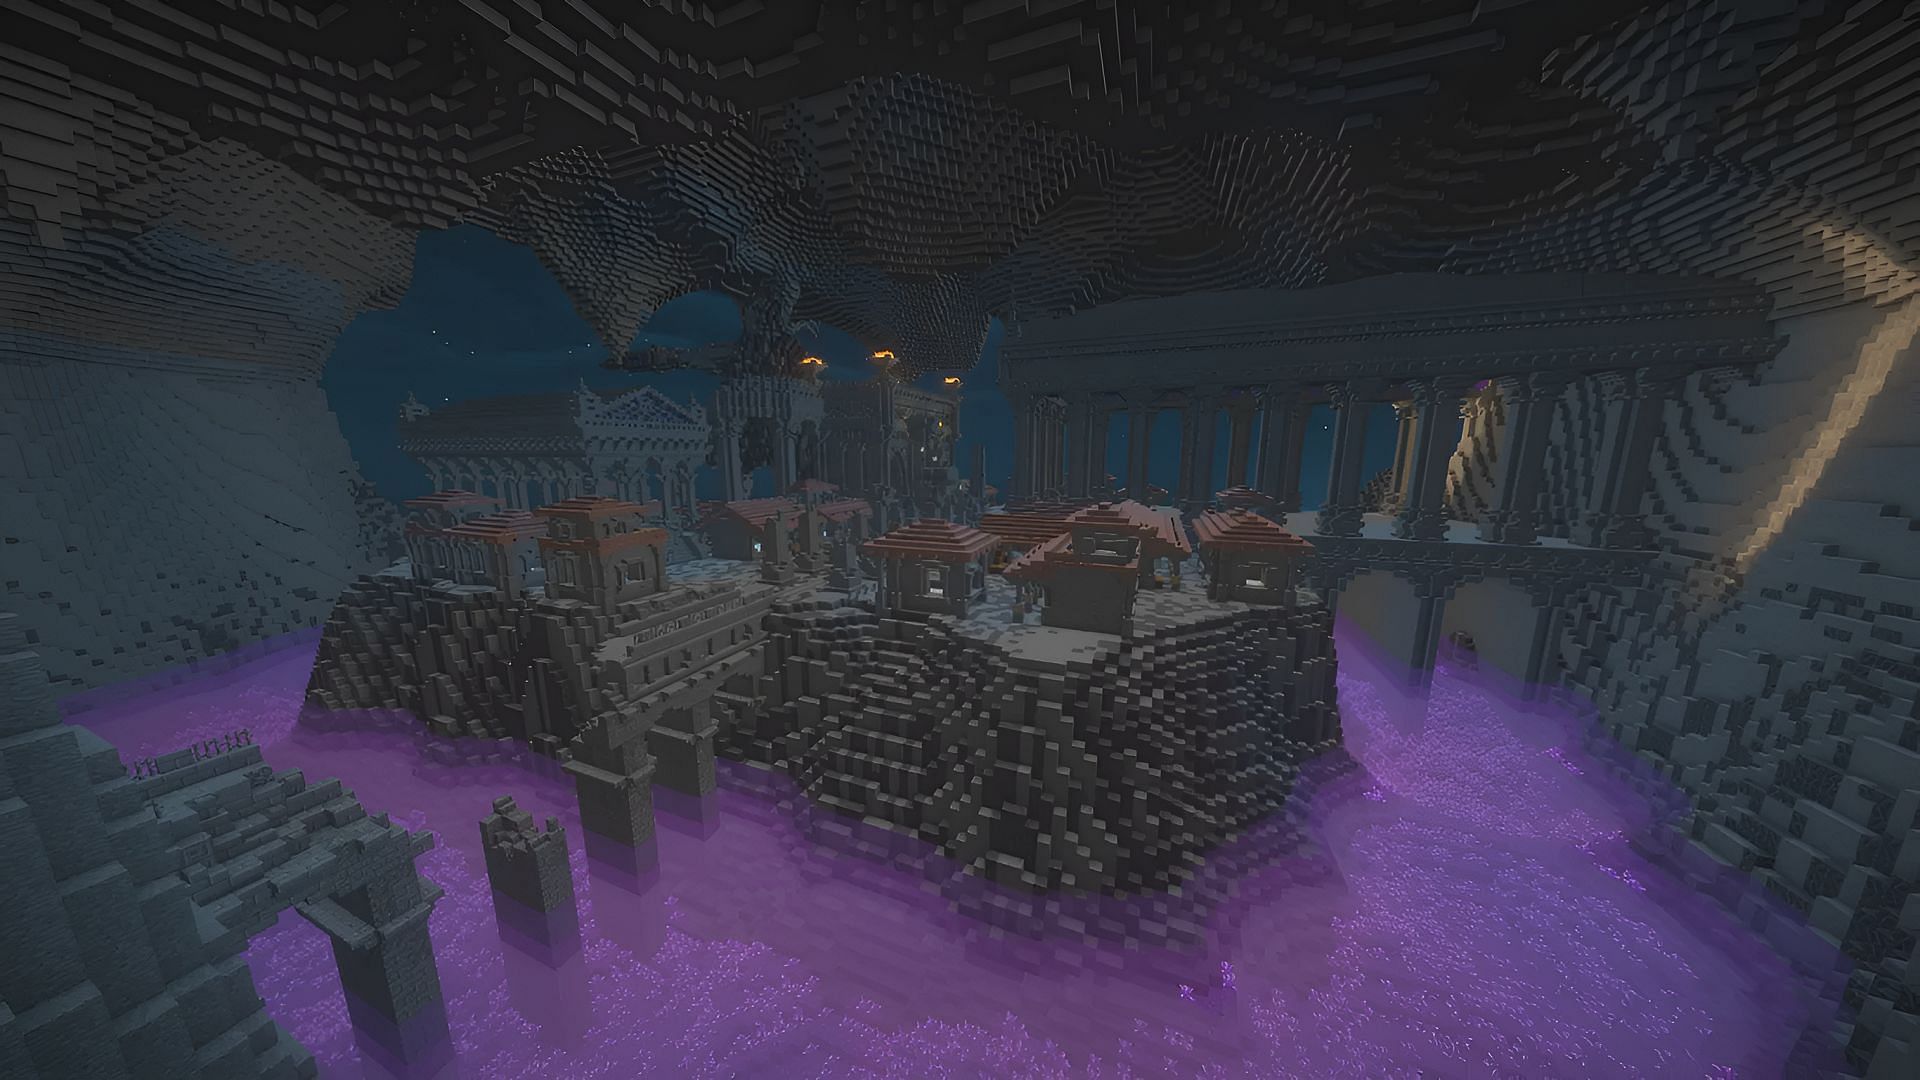 This town build utilizes basic Minecraft blocks and a well-made amethyst pool (Image via Cultofhappiness_/Reddit)